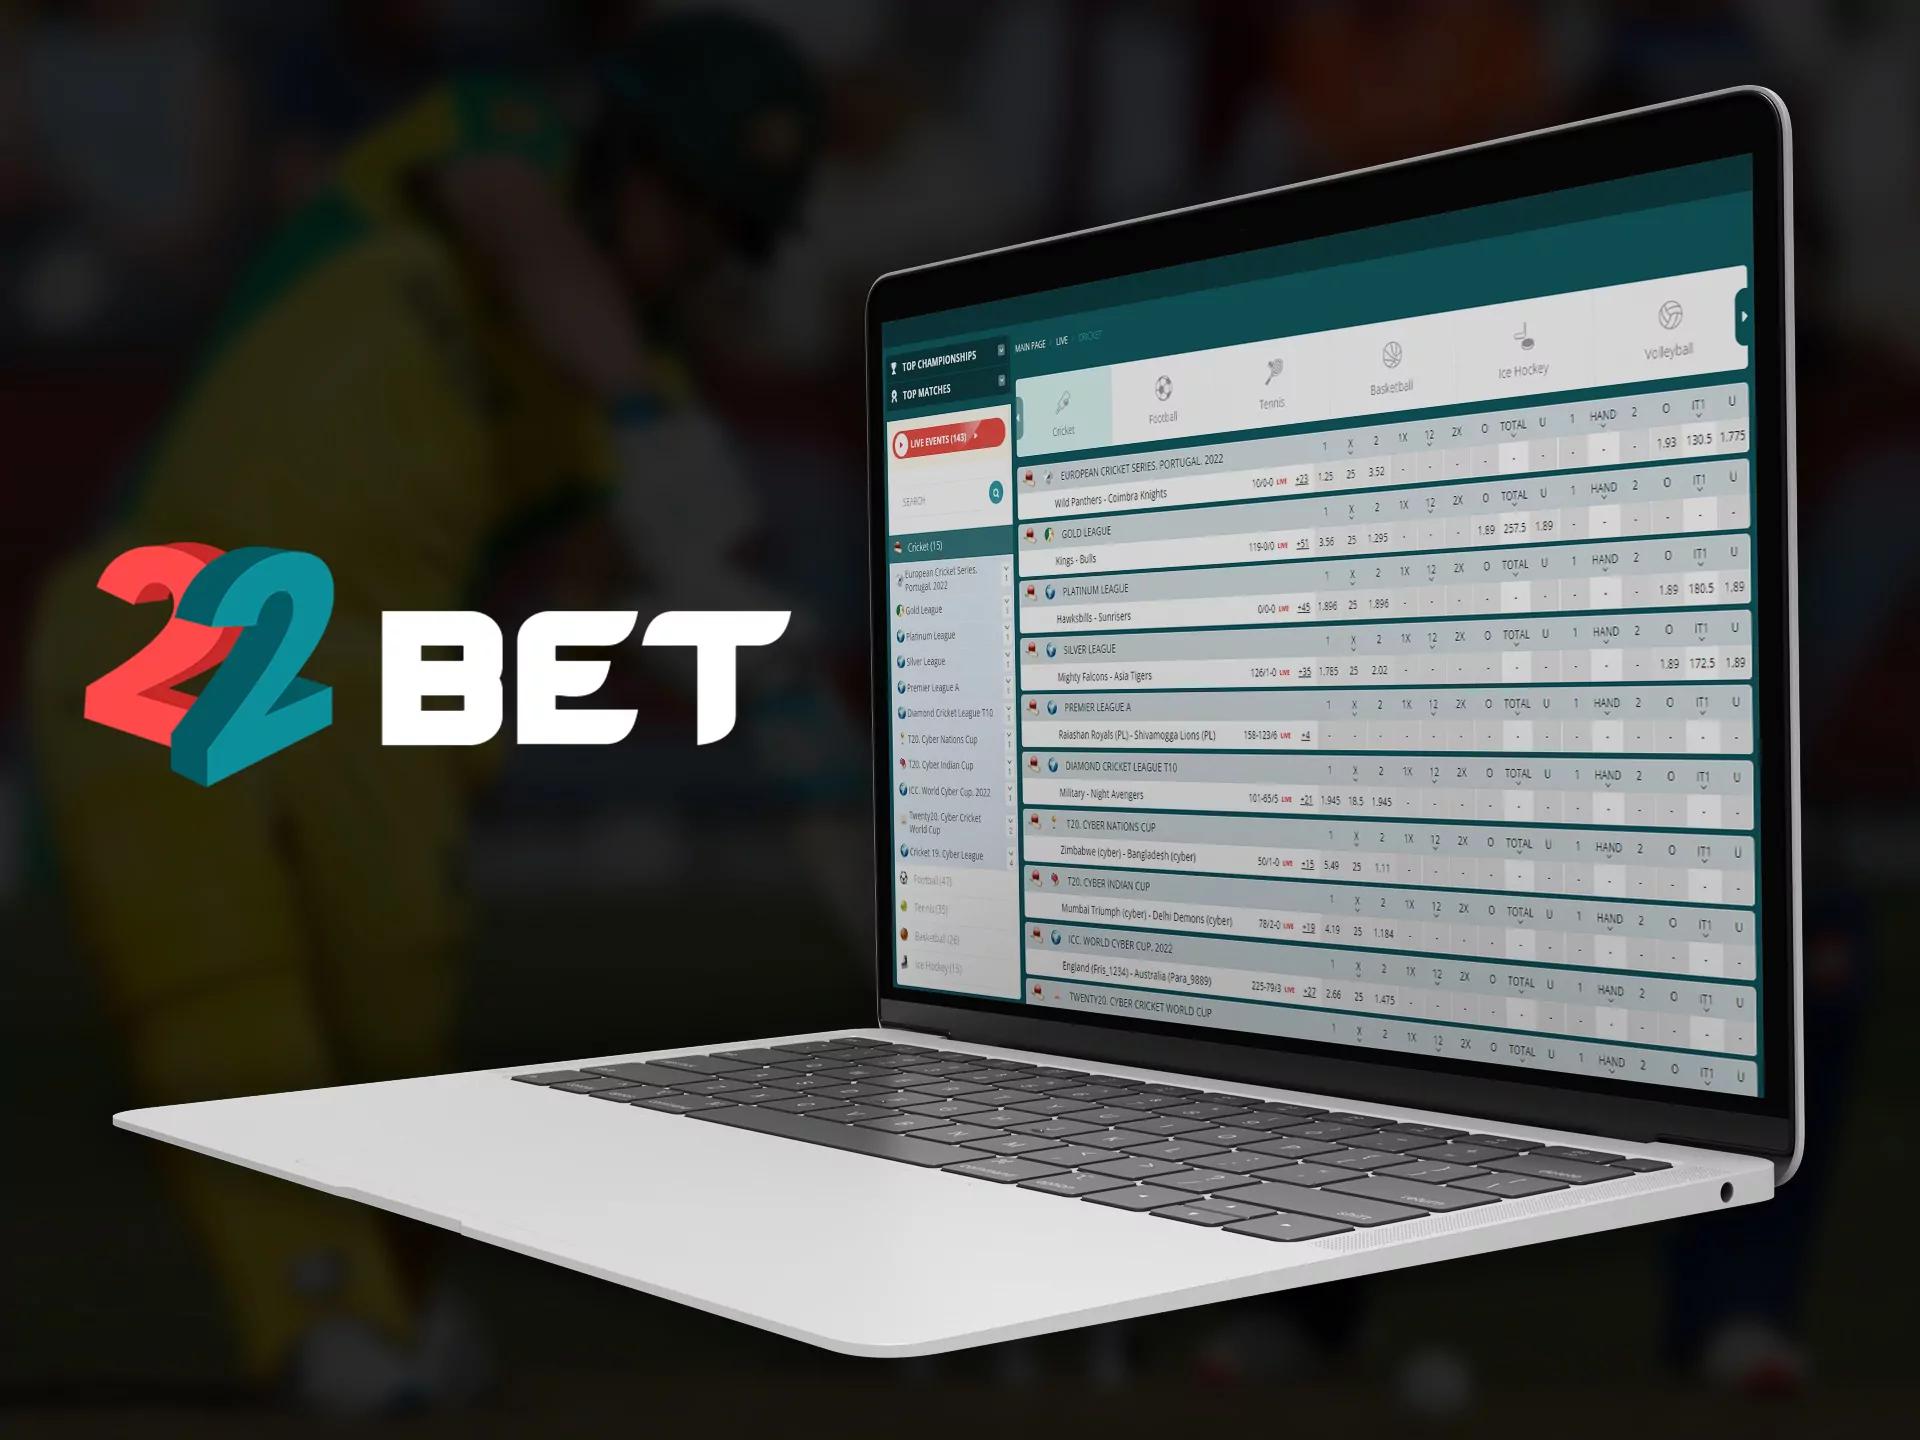 Bet on cricket at 22bet.